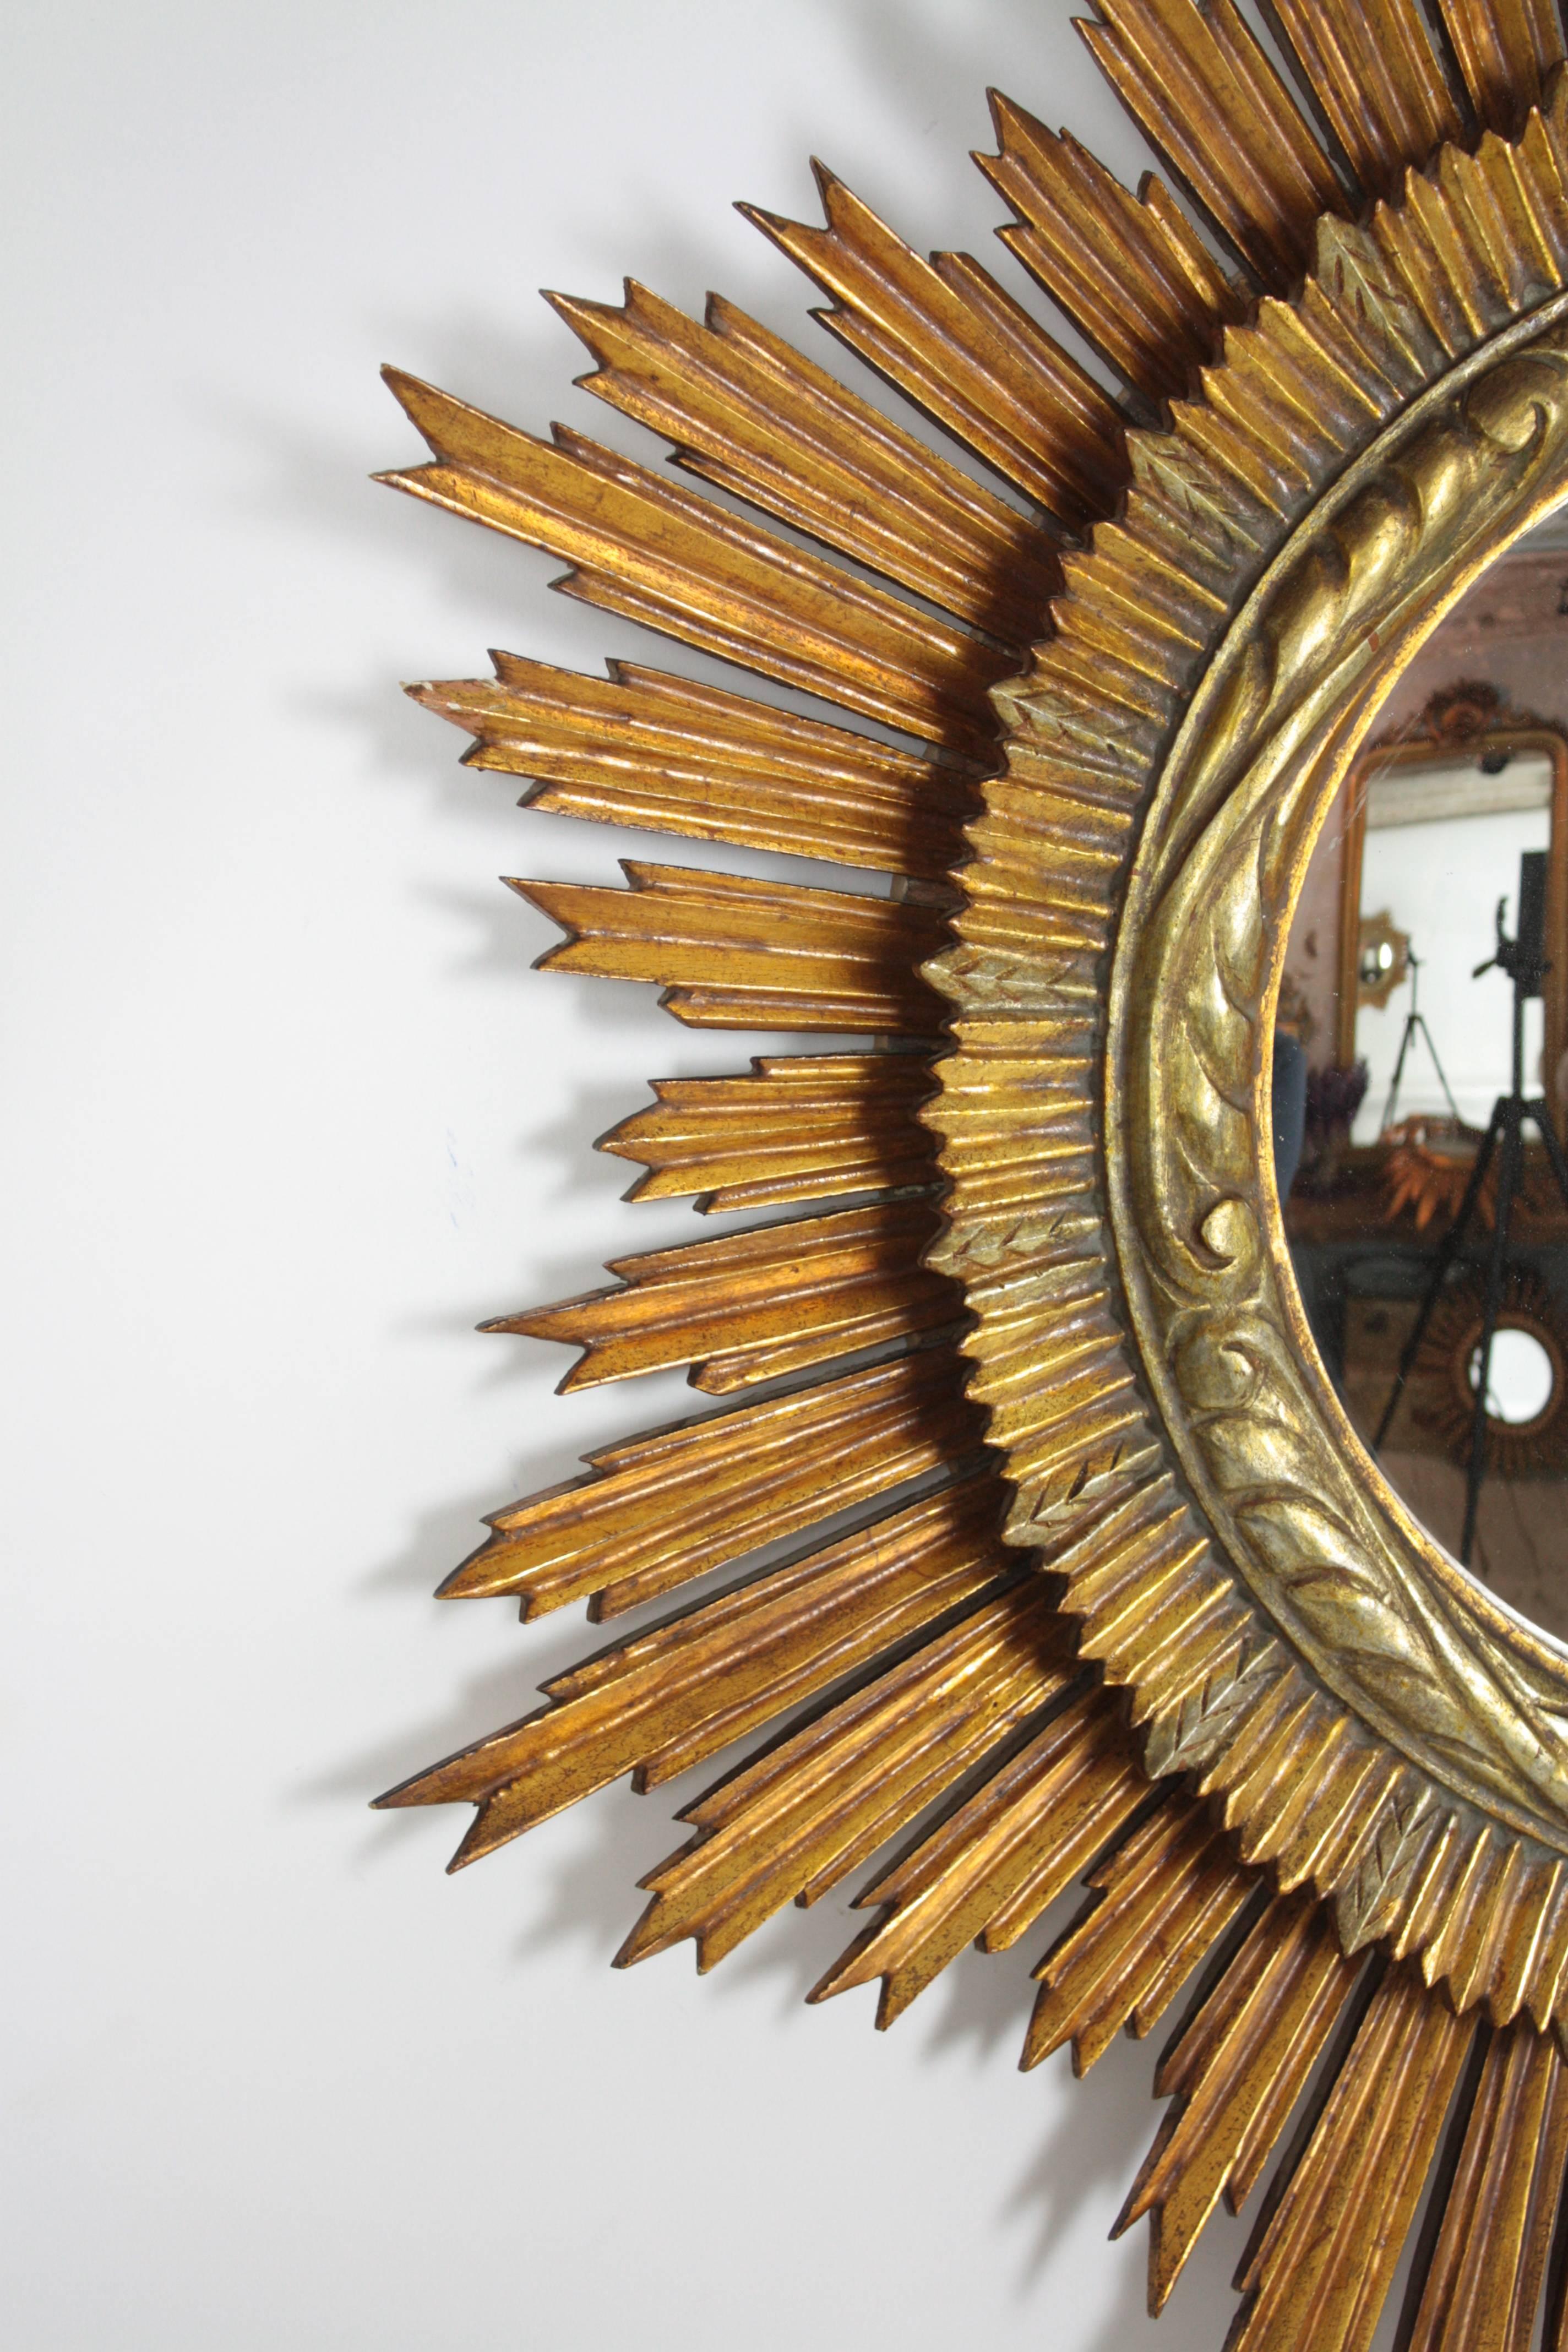 Spectacular Spanish hand-carved mirror, with a gold leaf finish.

The mirror has two layer frame with beautiful carved details and two tones of silver and gold leaf finish. Original fish eye mirror.

Excellent condition, lovely patina.